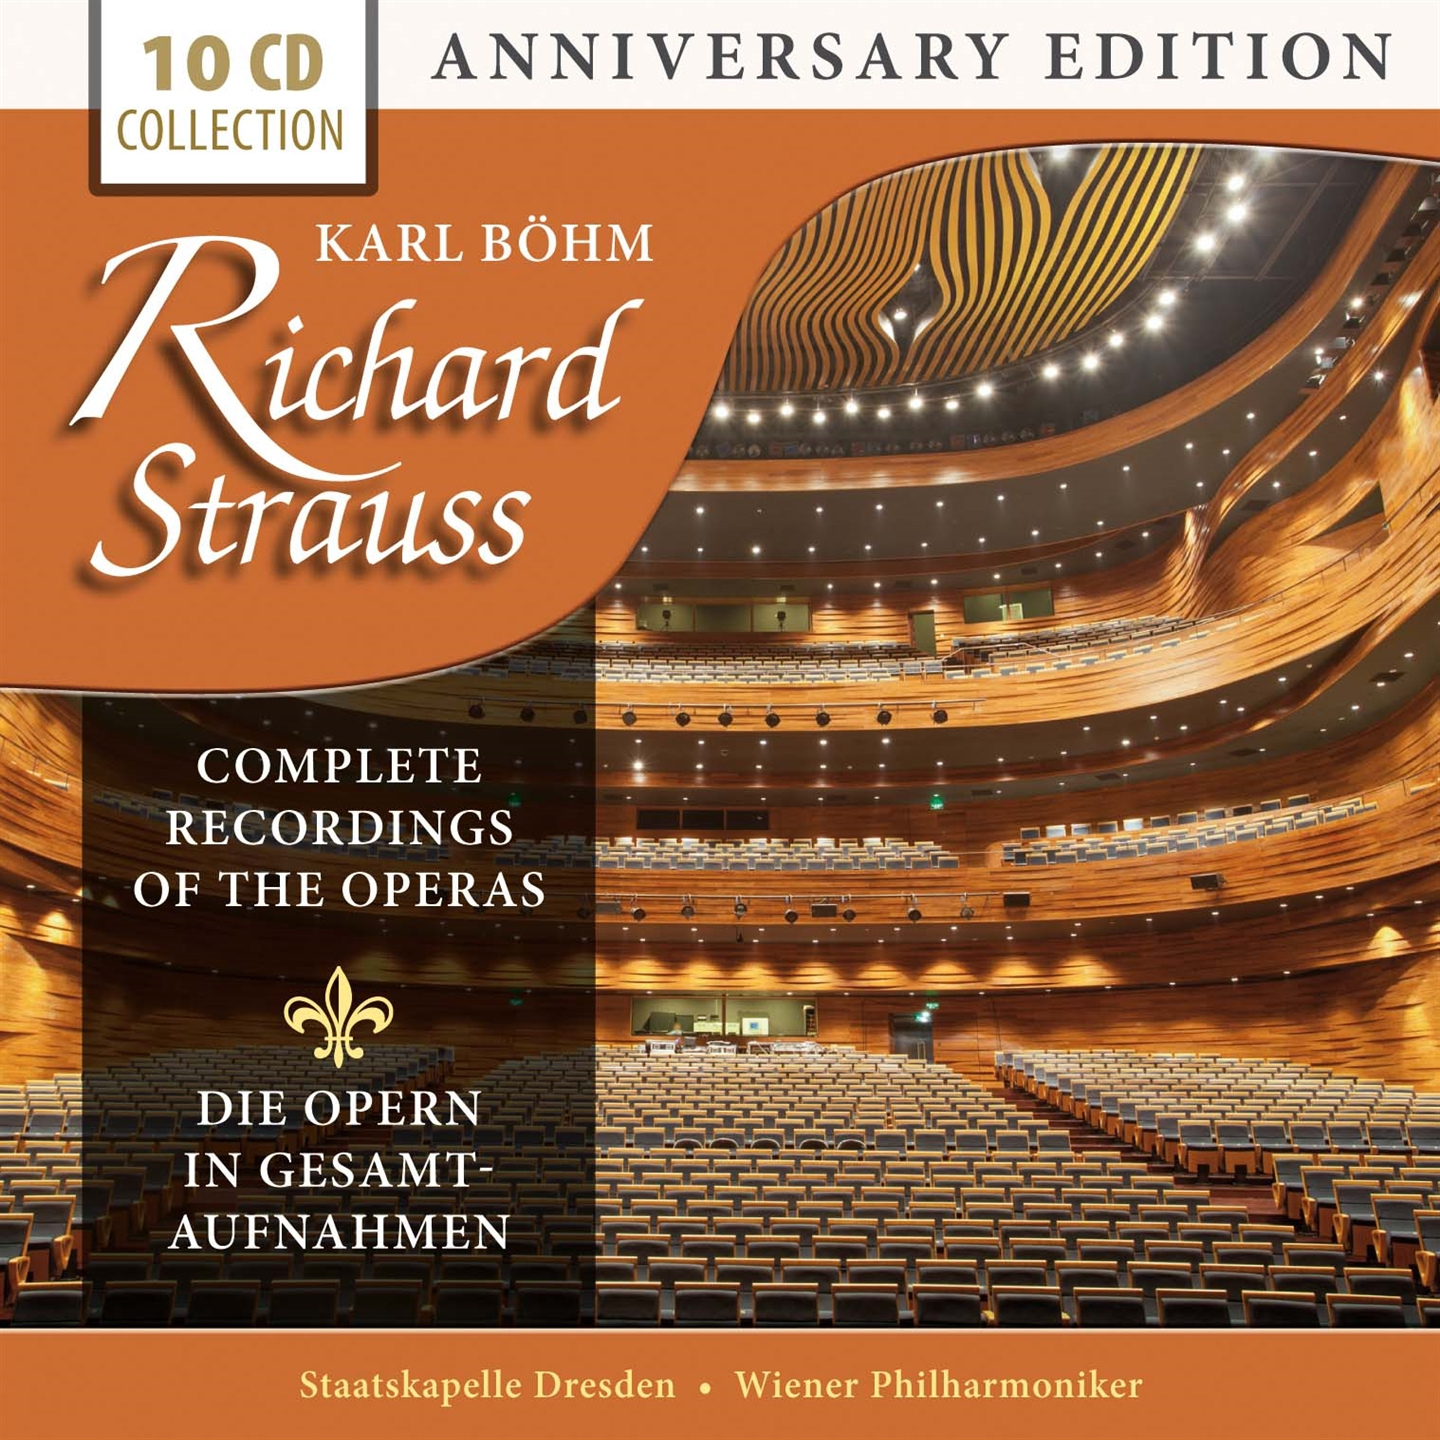 RICHARD STRAUSS: COMPLETE RECORDINGS OF THE OPERAS